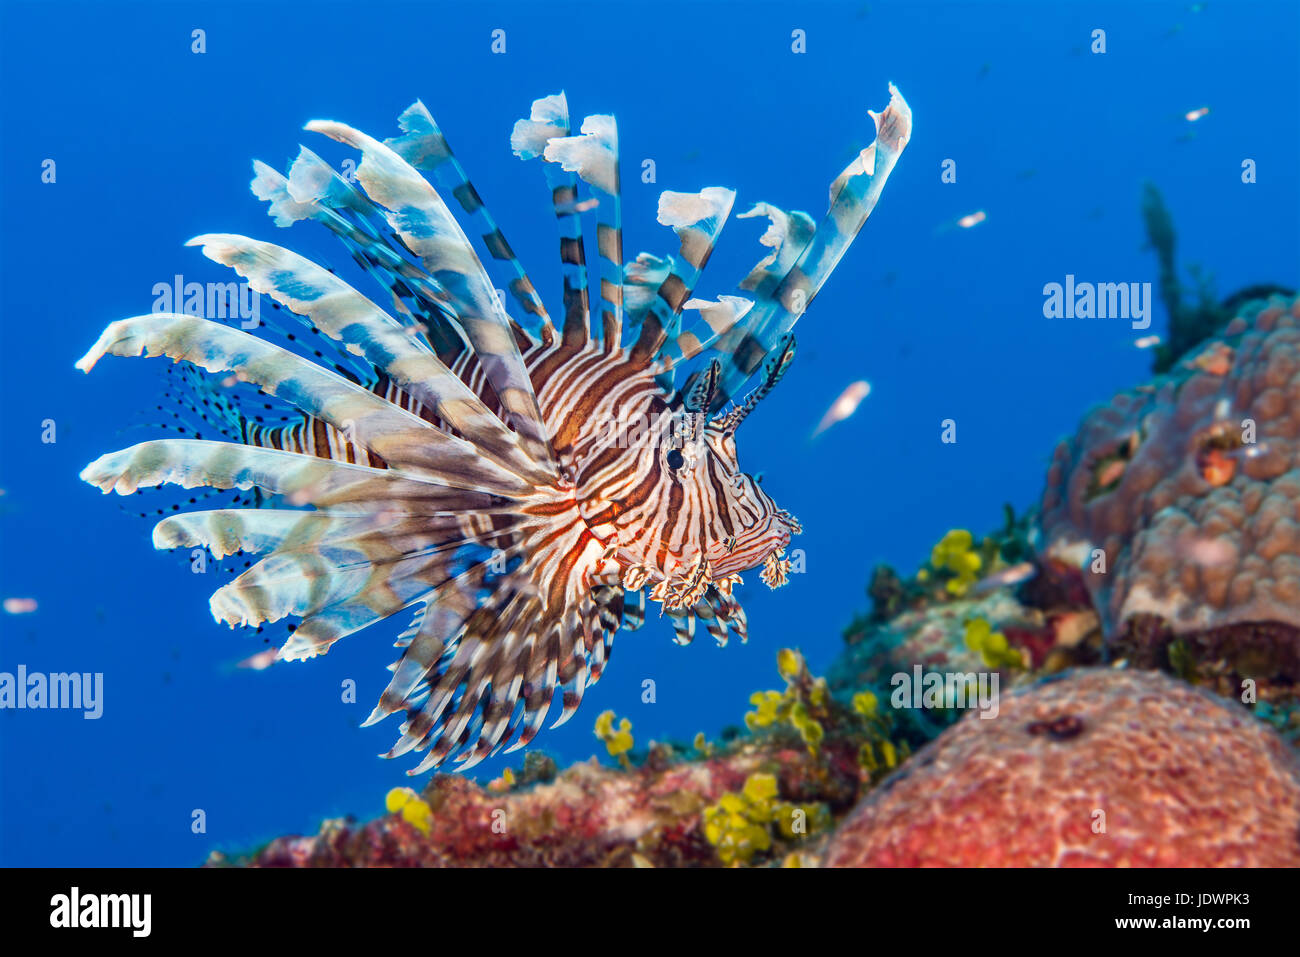 Common Lionfish {Pterois volitans} is an invasive species in the Caribbean. Bahamas, December Stock Photo